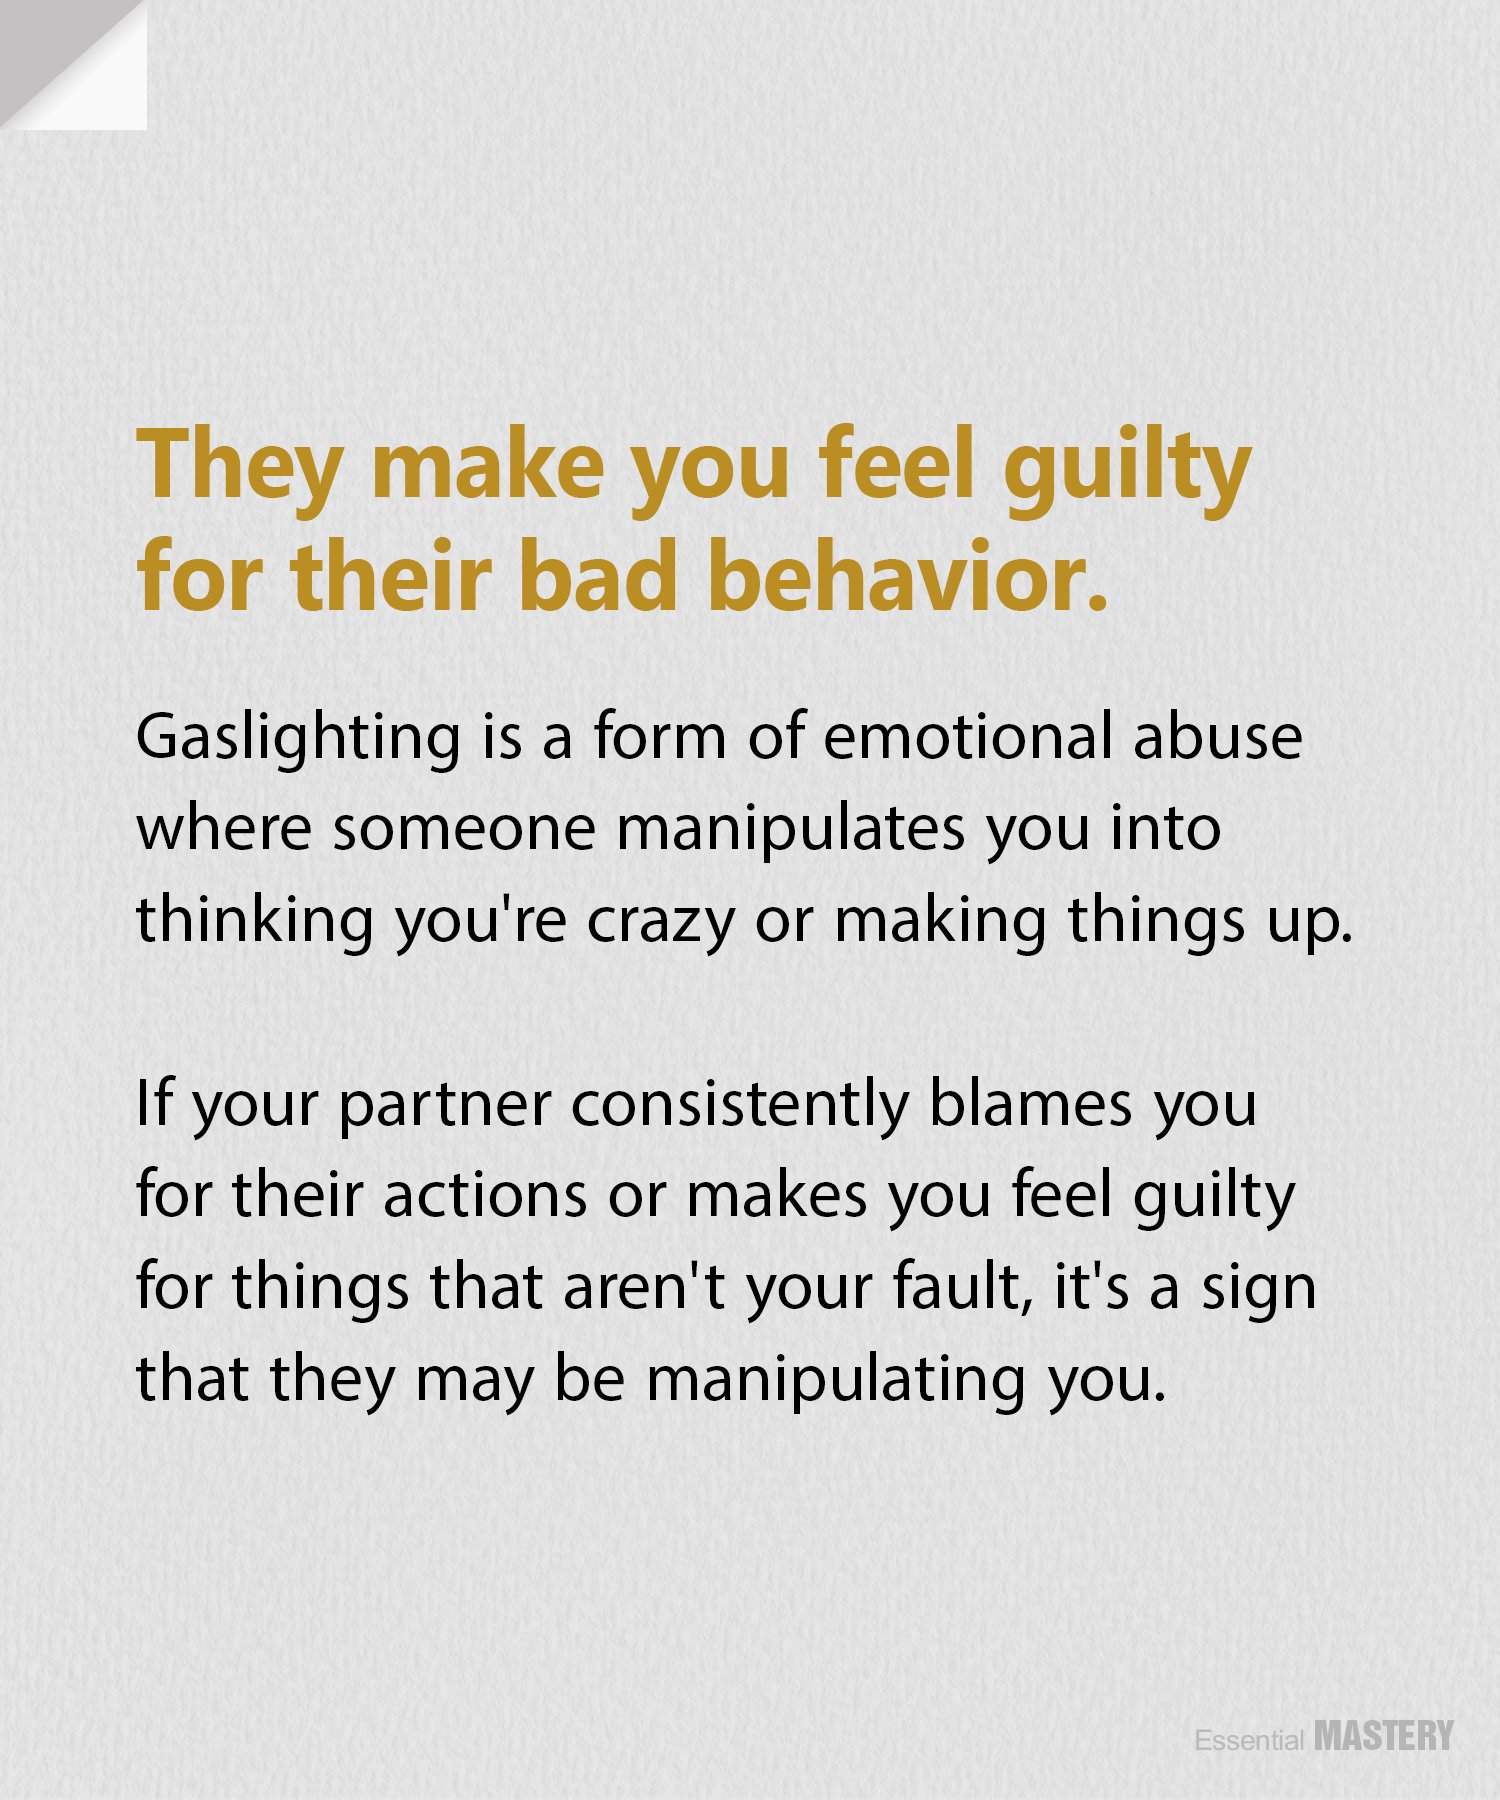 Signs of Emotional Manipulation That Everyone Should Know